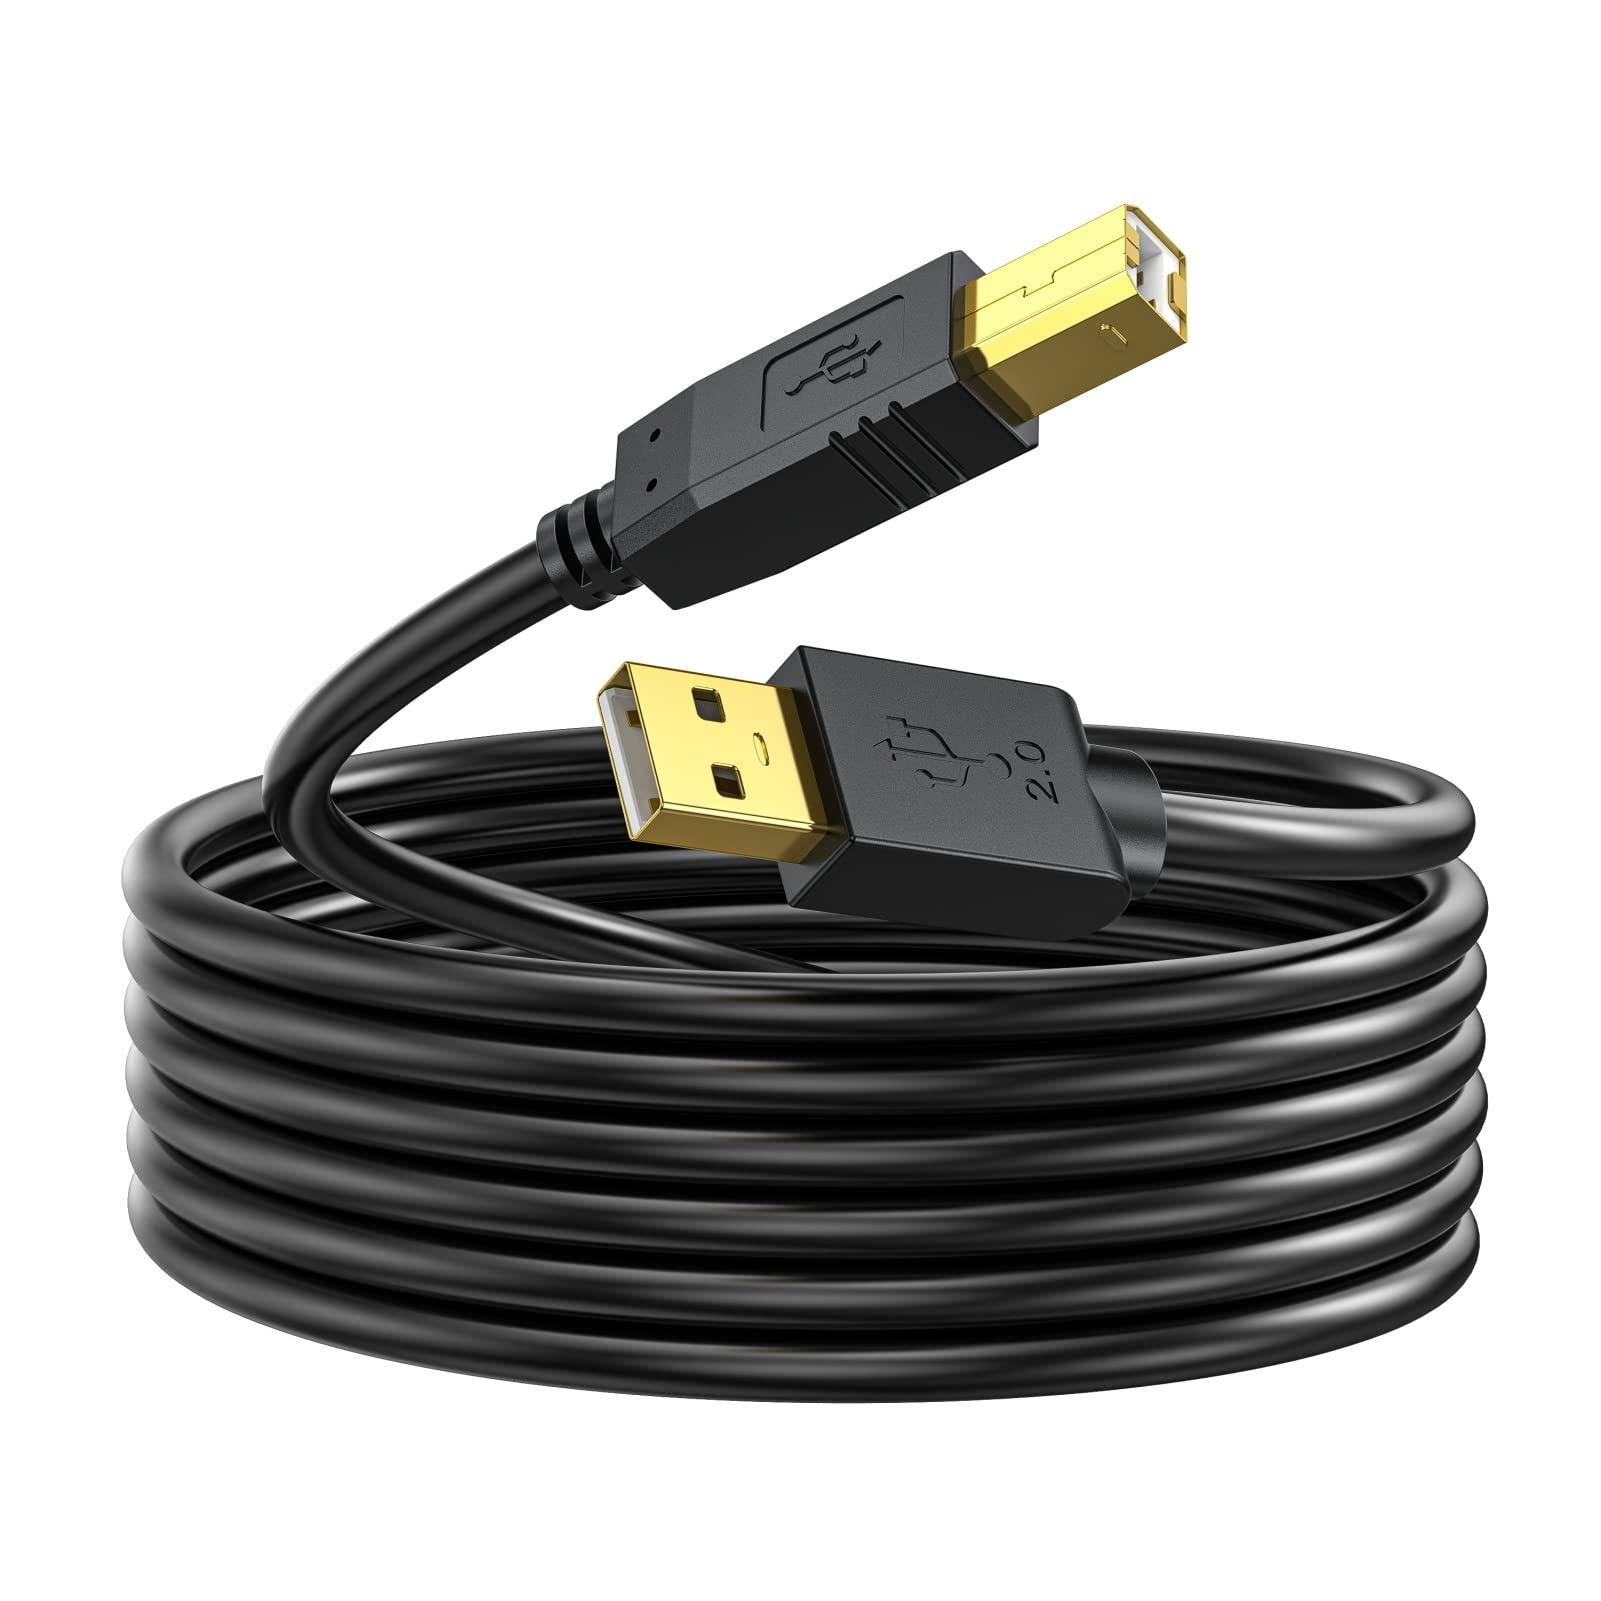 Gold-Plated 6 Feet USB Printer Cable for Optimal Data Transfer Speed | Image